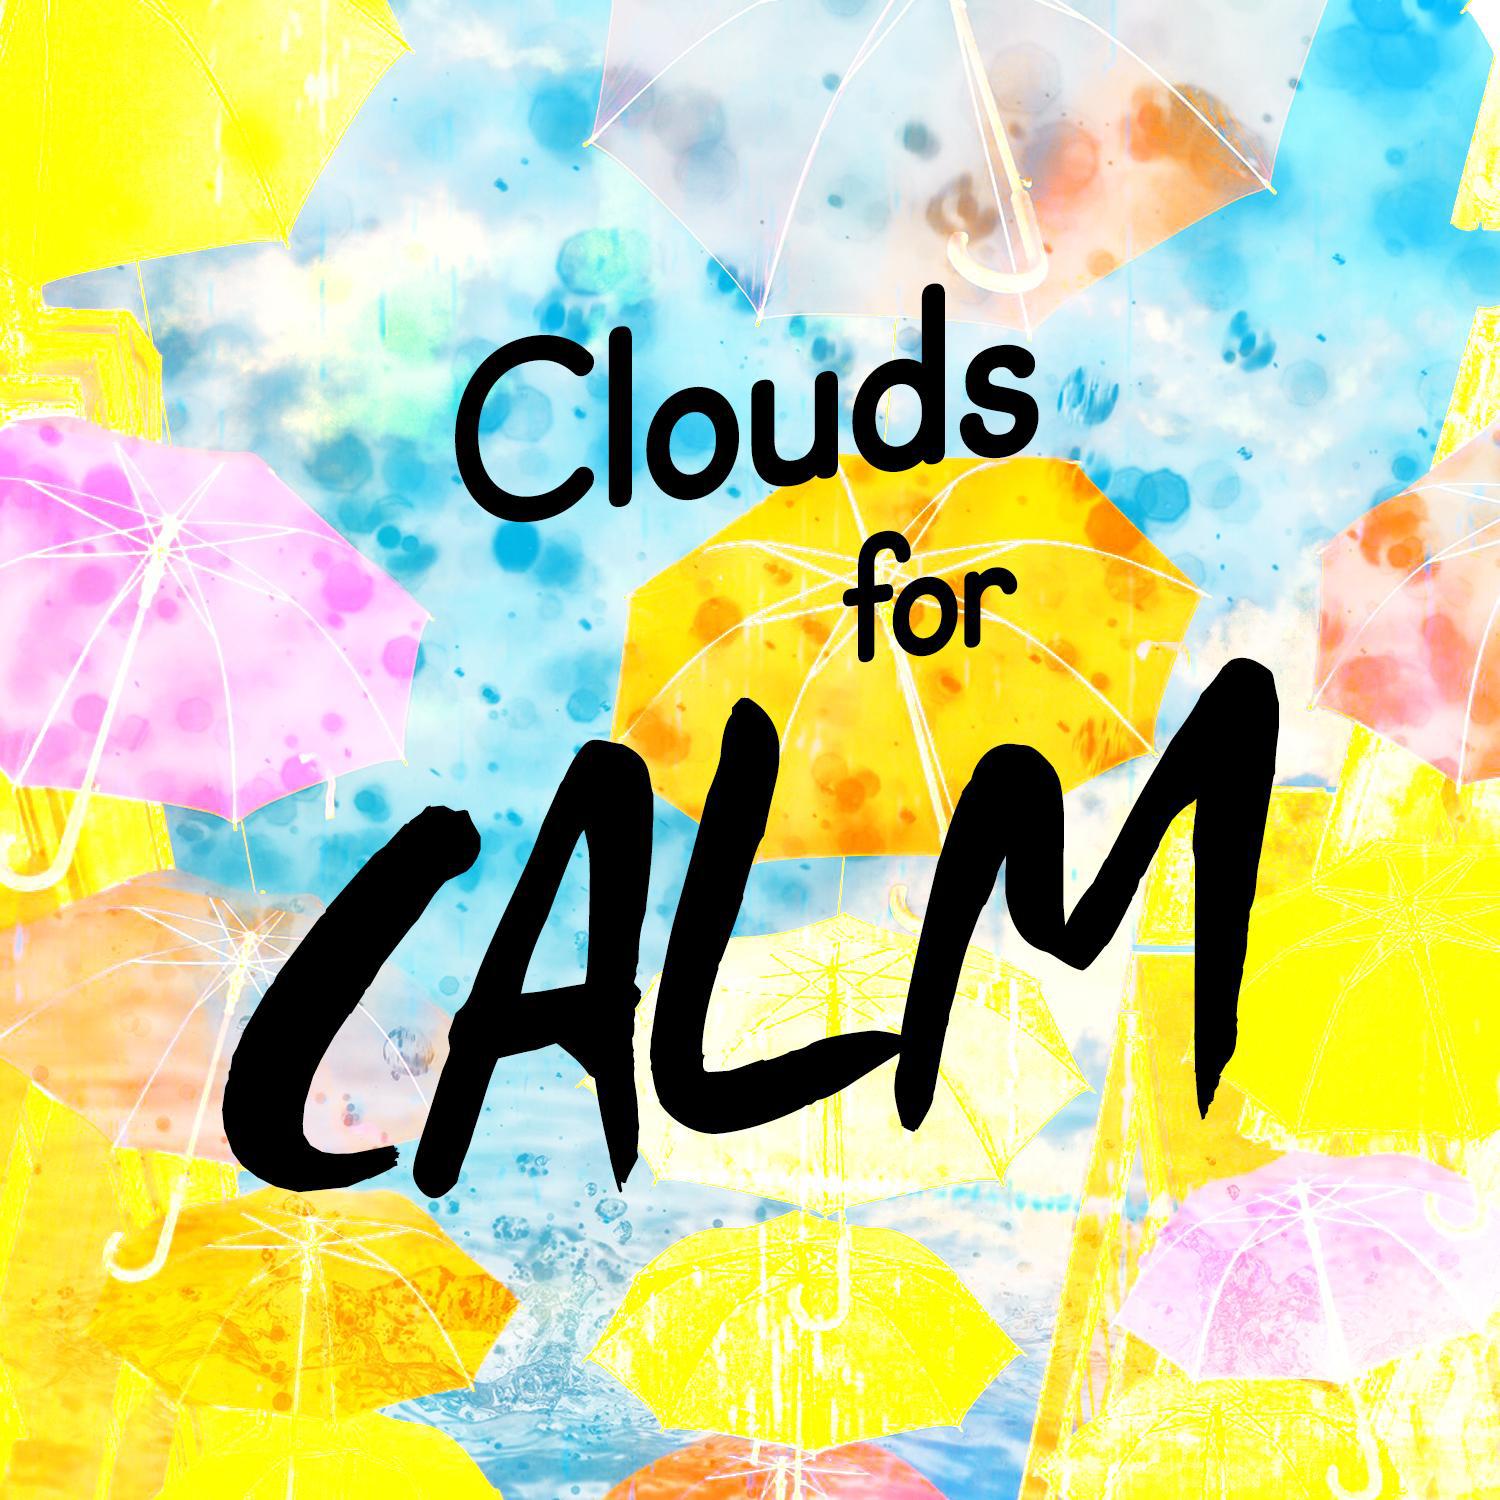 Clouds for Calm